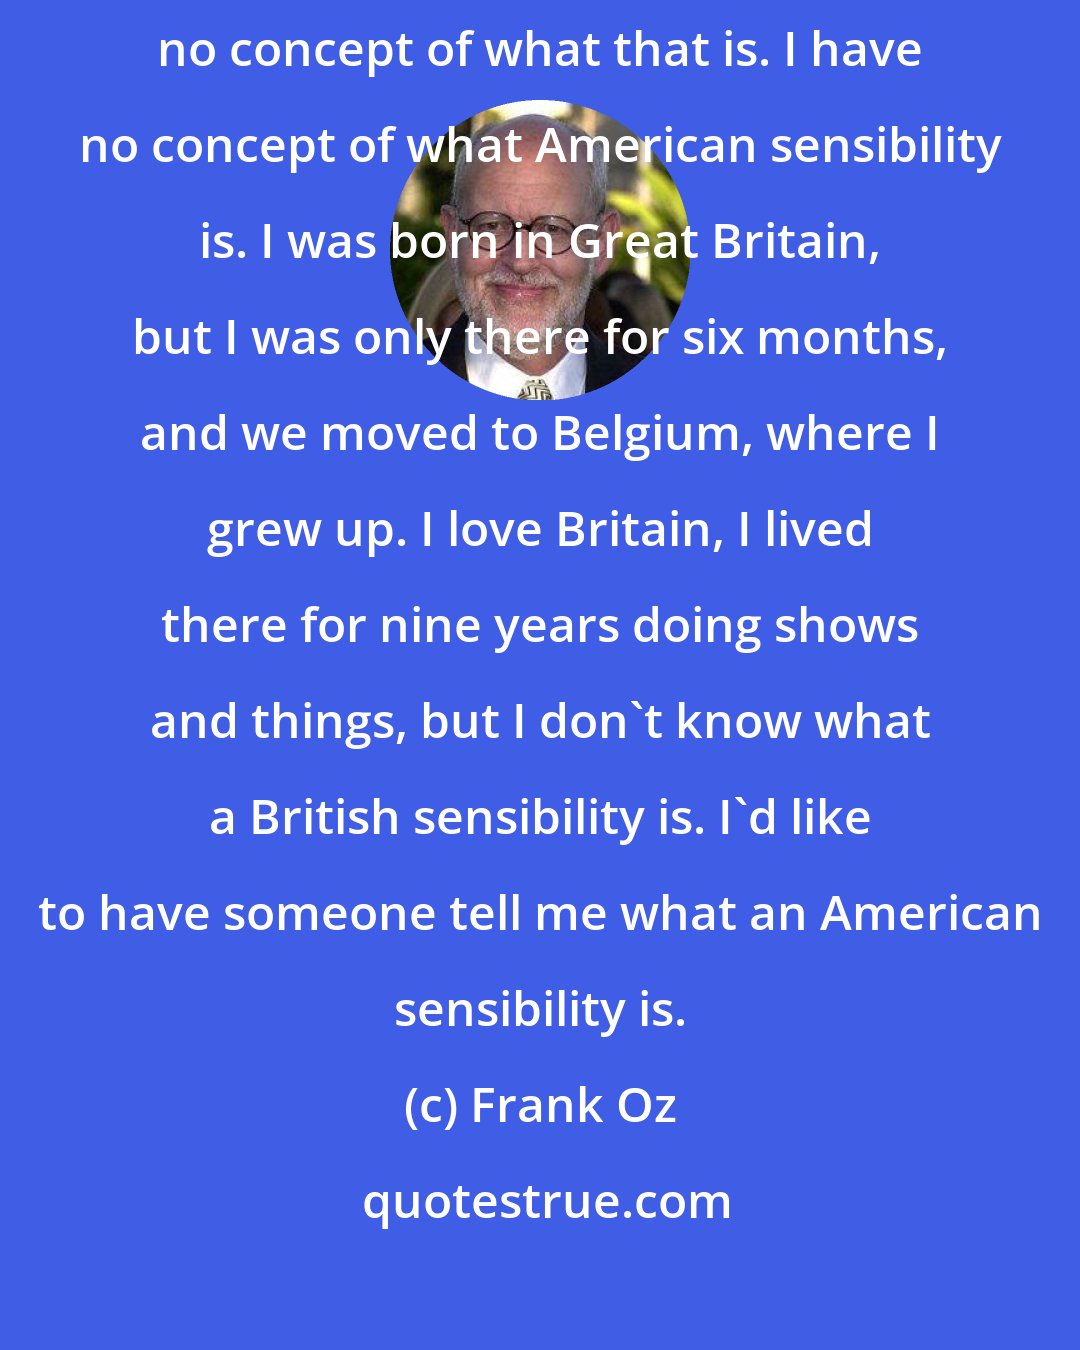 Frank Oz: I have no idea what a British sensibility or a British sense of humor is. I have no concept of what that is. I have no concept of what American sensibility is. I was born in Great Britain, but I was only there for six months, and we moved to Belgium, where I grew up. I love Britain, I lived there for nine years doing shows and things, but I don't know what a British sensibility is. I'd like to have someone tell me what an American sensibility is.